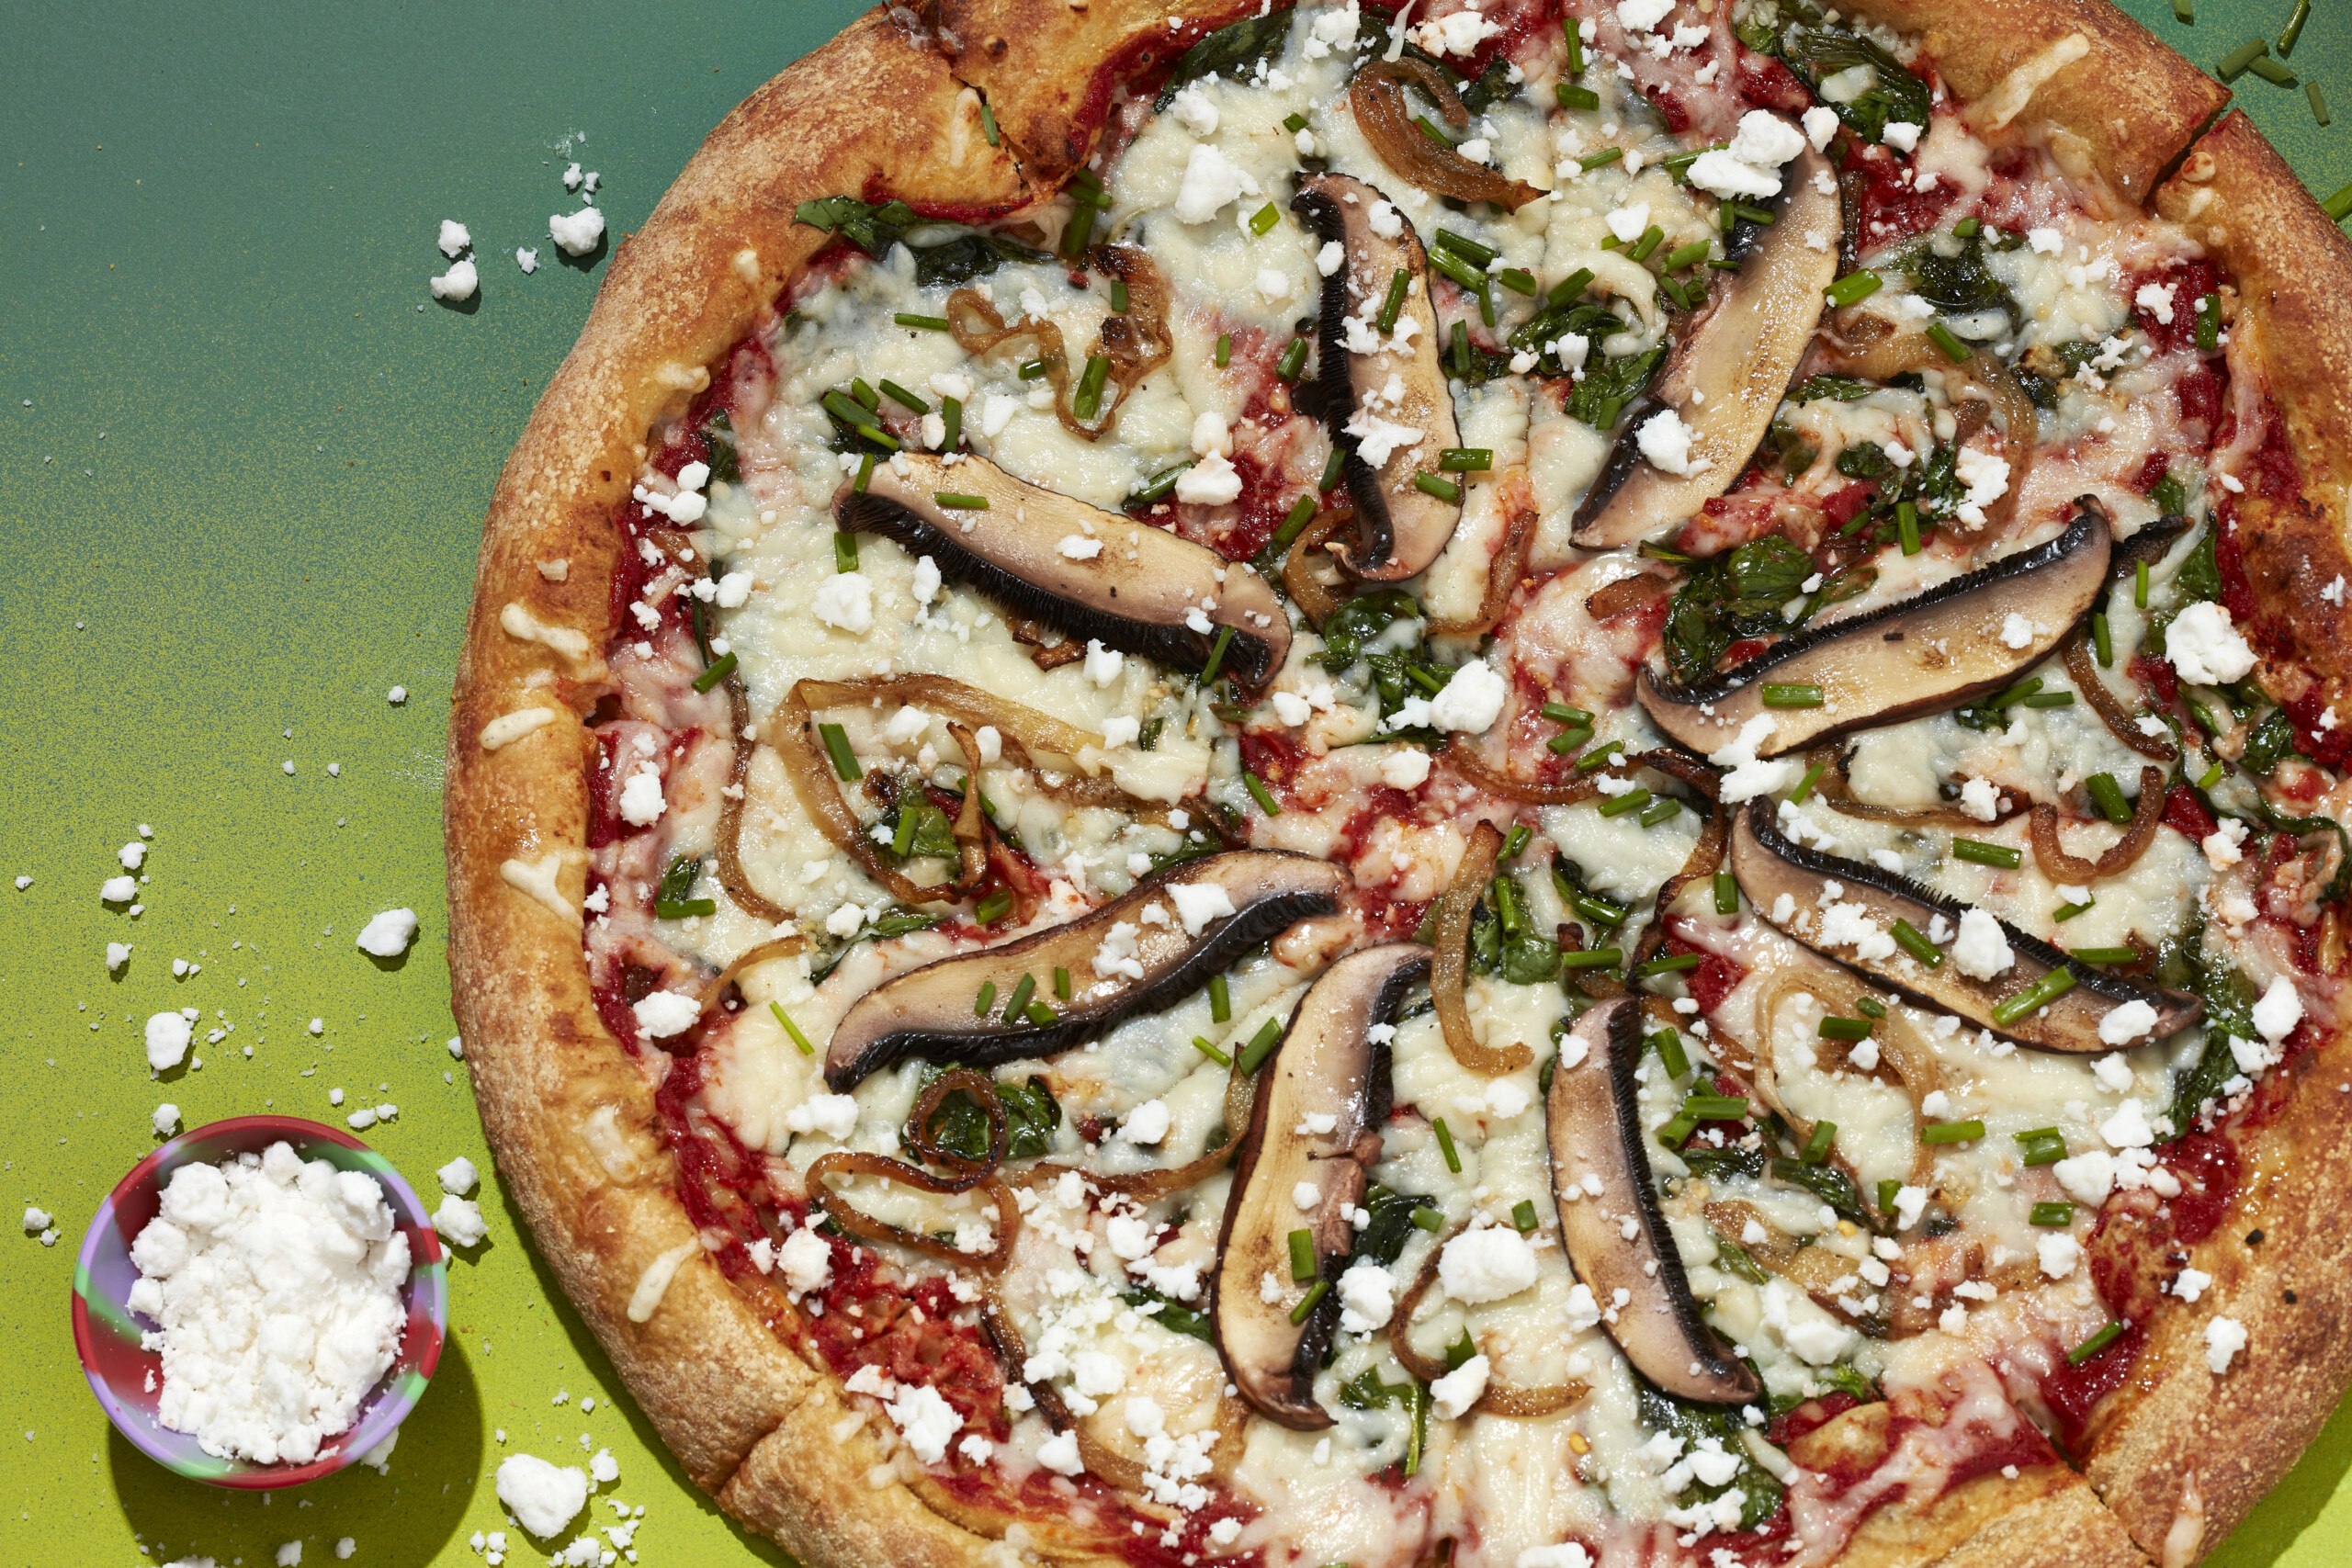 Mellow Mushroom celebrates Veganuary by bringing back limited-time only Miss Mushroom pizza